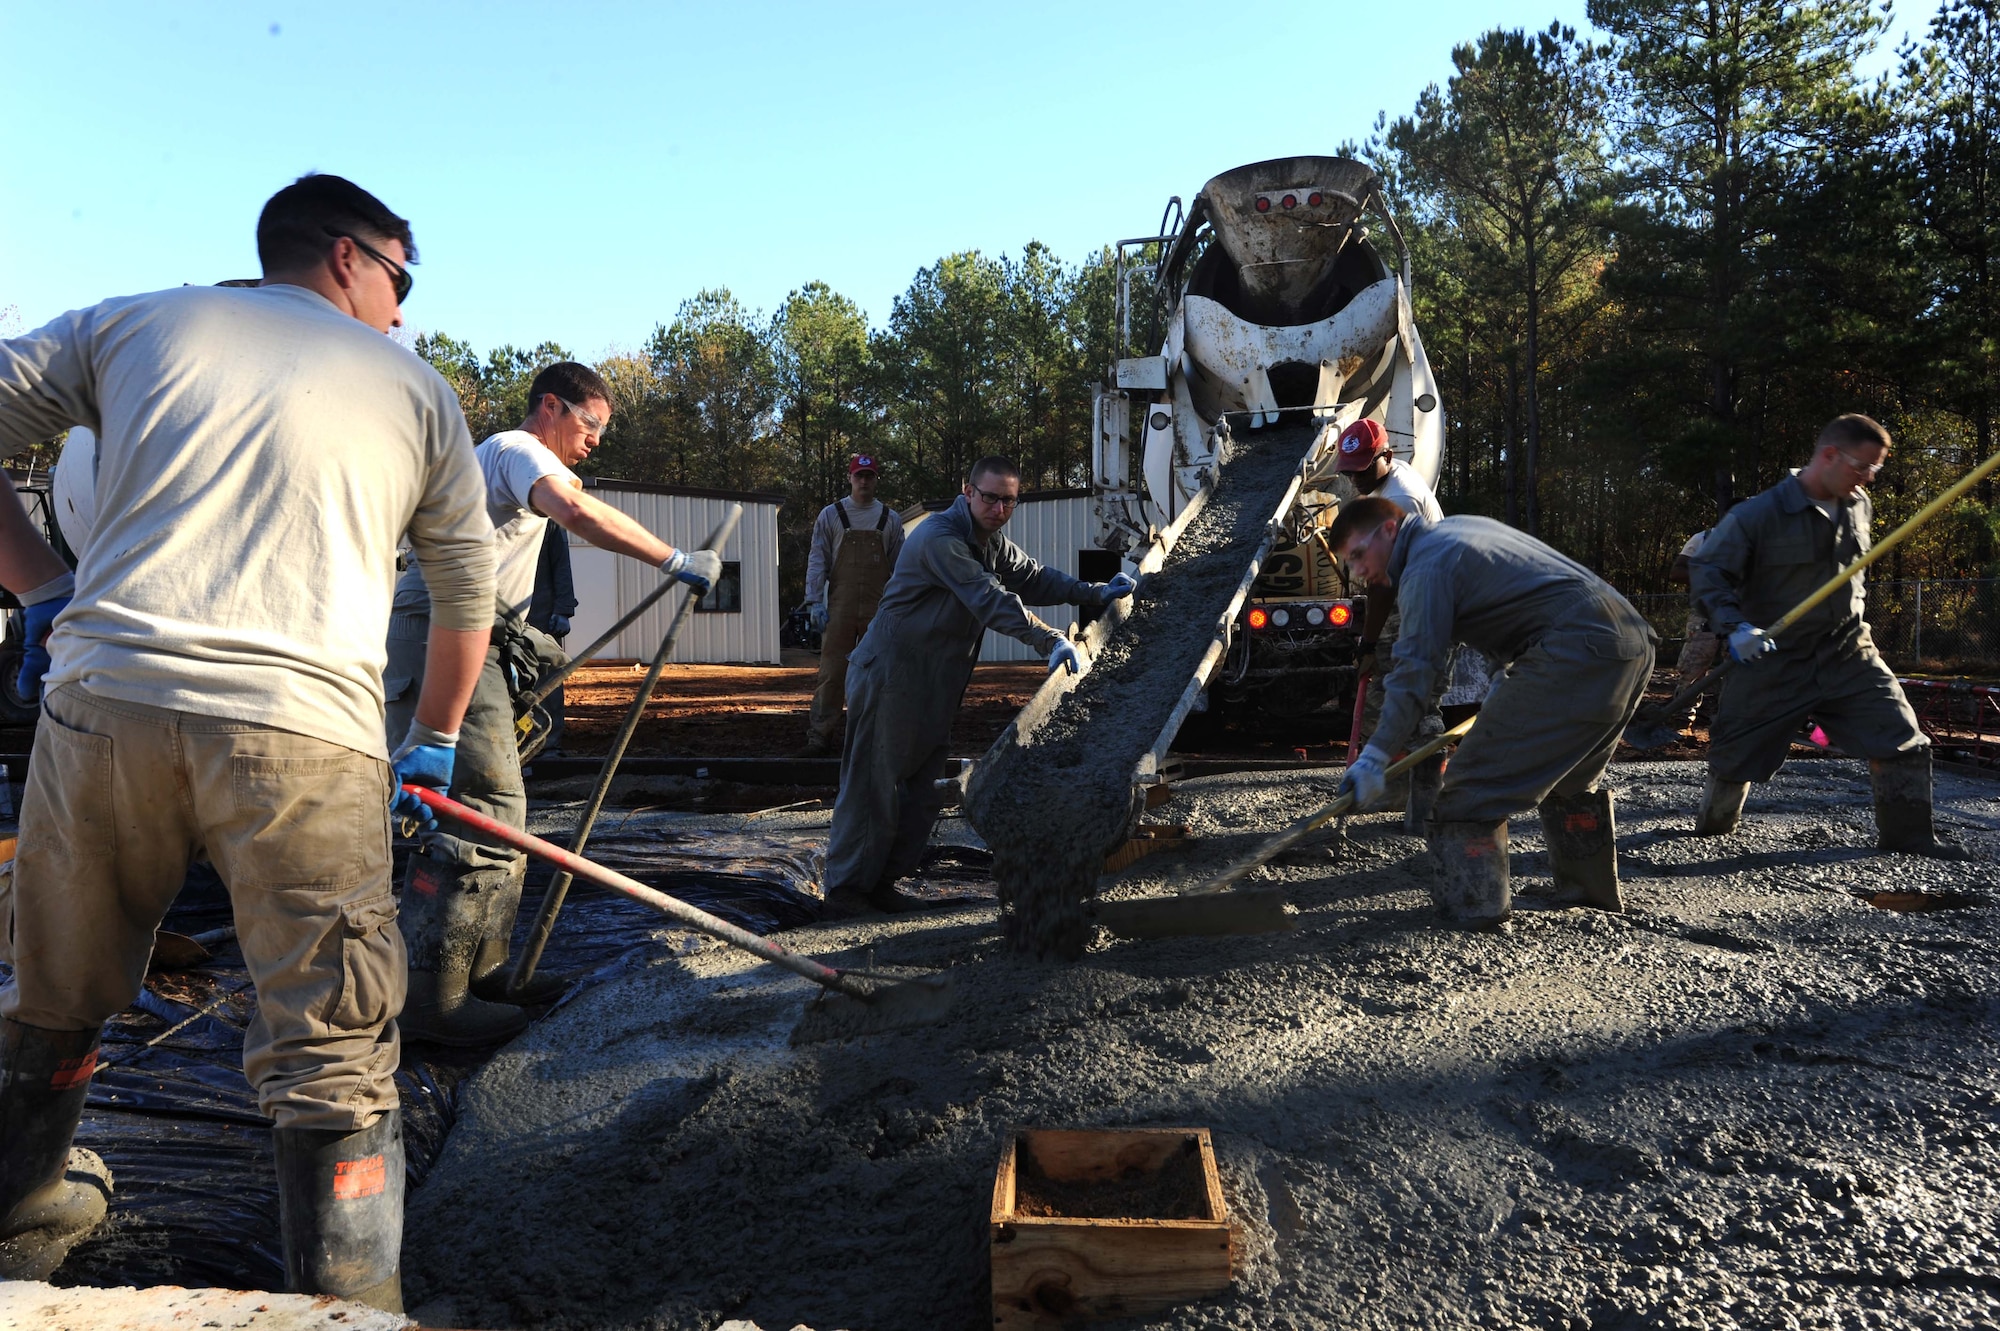 Airmen from the 823rd Rapid Engineer Deployable Heavy Operational Repair Squadron Engineer (RED HORSE) from Hurlburt Field, Florida, smooth concrete for what will be a new latrine facility at the Vigilant Warrior training site Dec. 15, 2015, near Titus, Alabama. RED HORSE is scheduled to have all new construction projects finished no later than April 2016. (U.S. Air Force photo by Airman 1st Class Alexa Culbert)